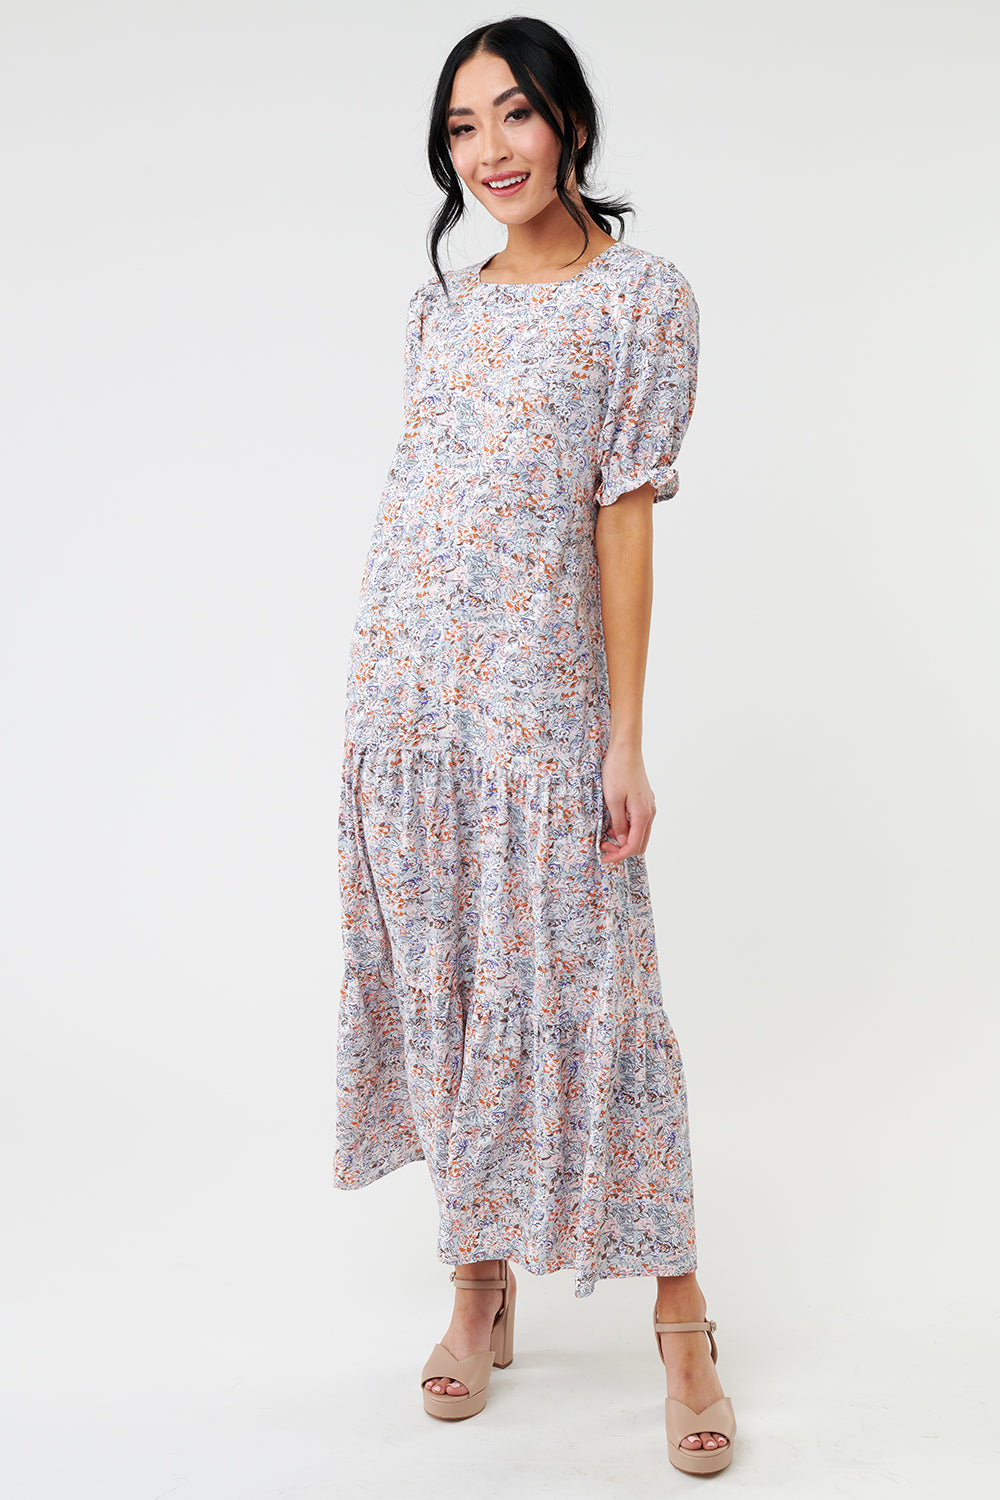 Made For Sun Floral Maxi Dress